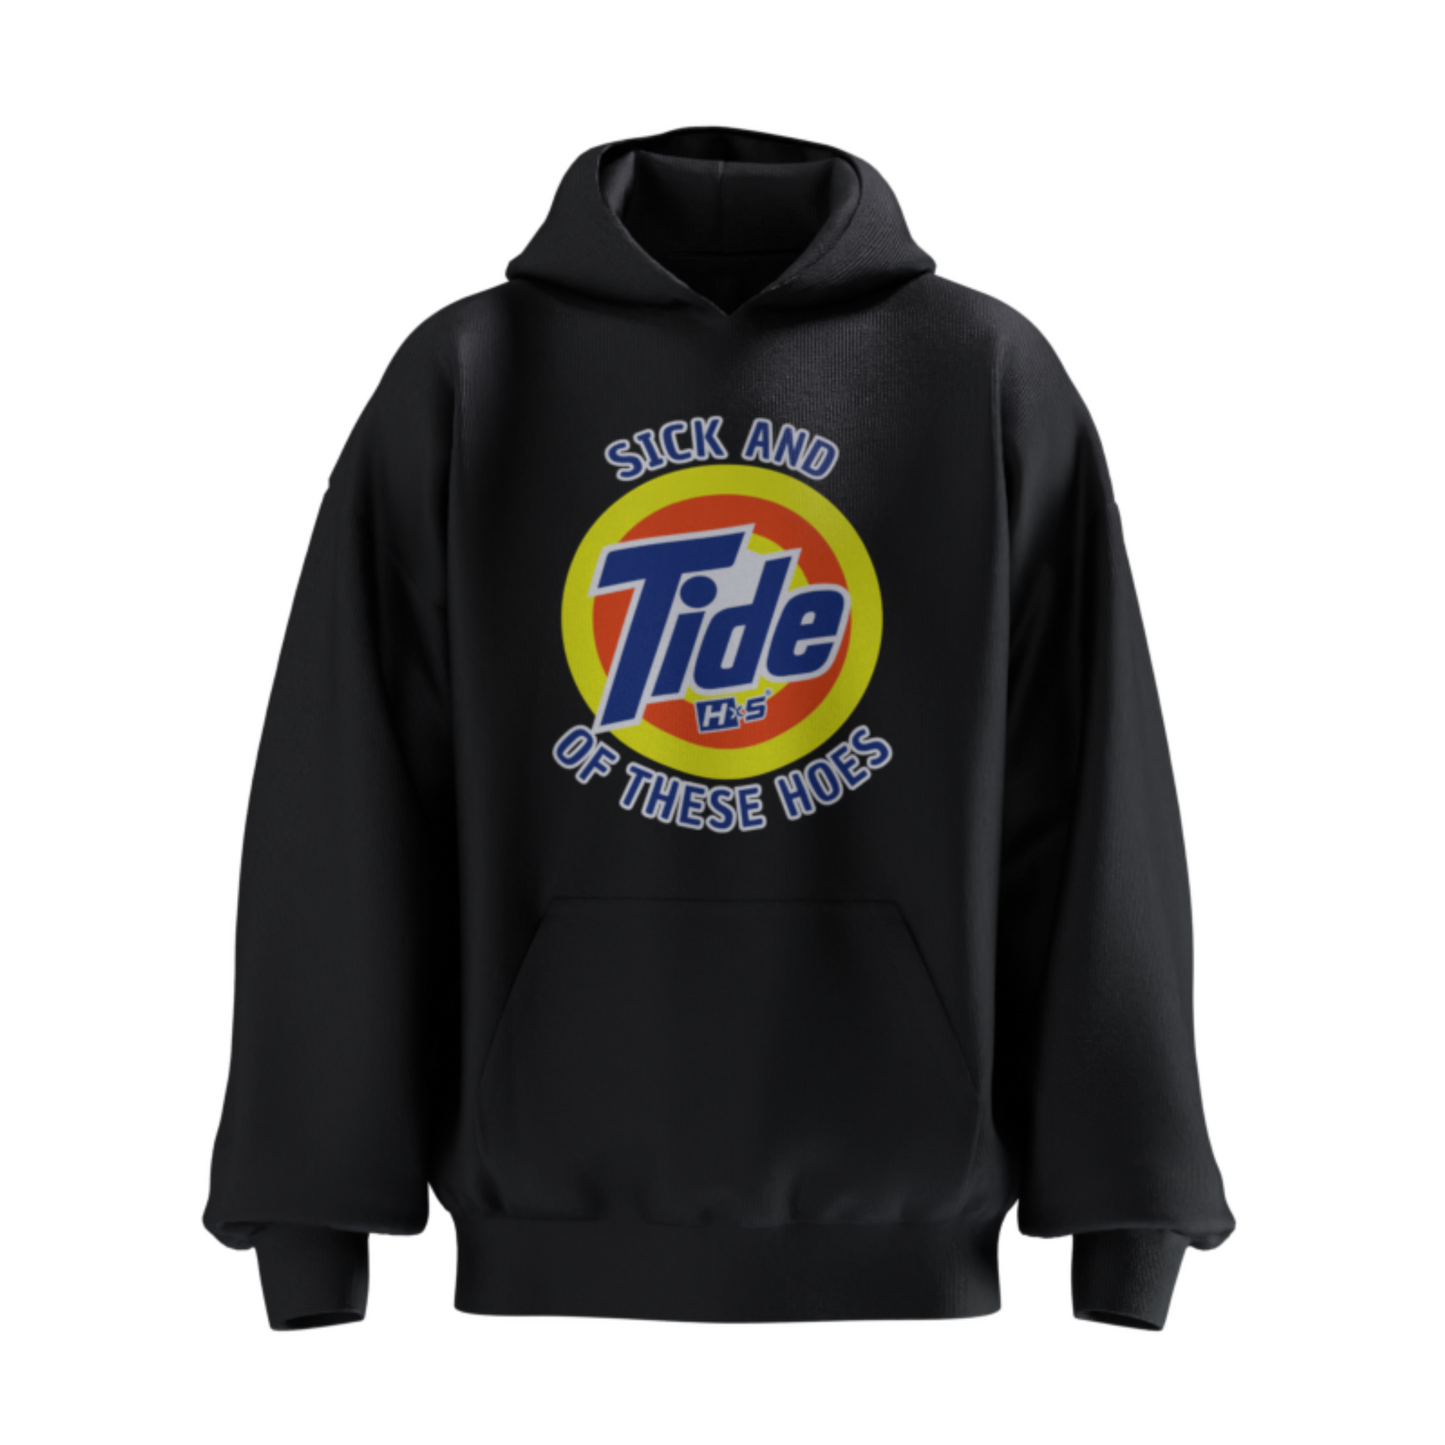 HYPExSTORE® SICK AND TIDE OF THESE HOES OVERSIZED HOODIE 380 GSM